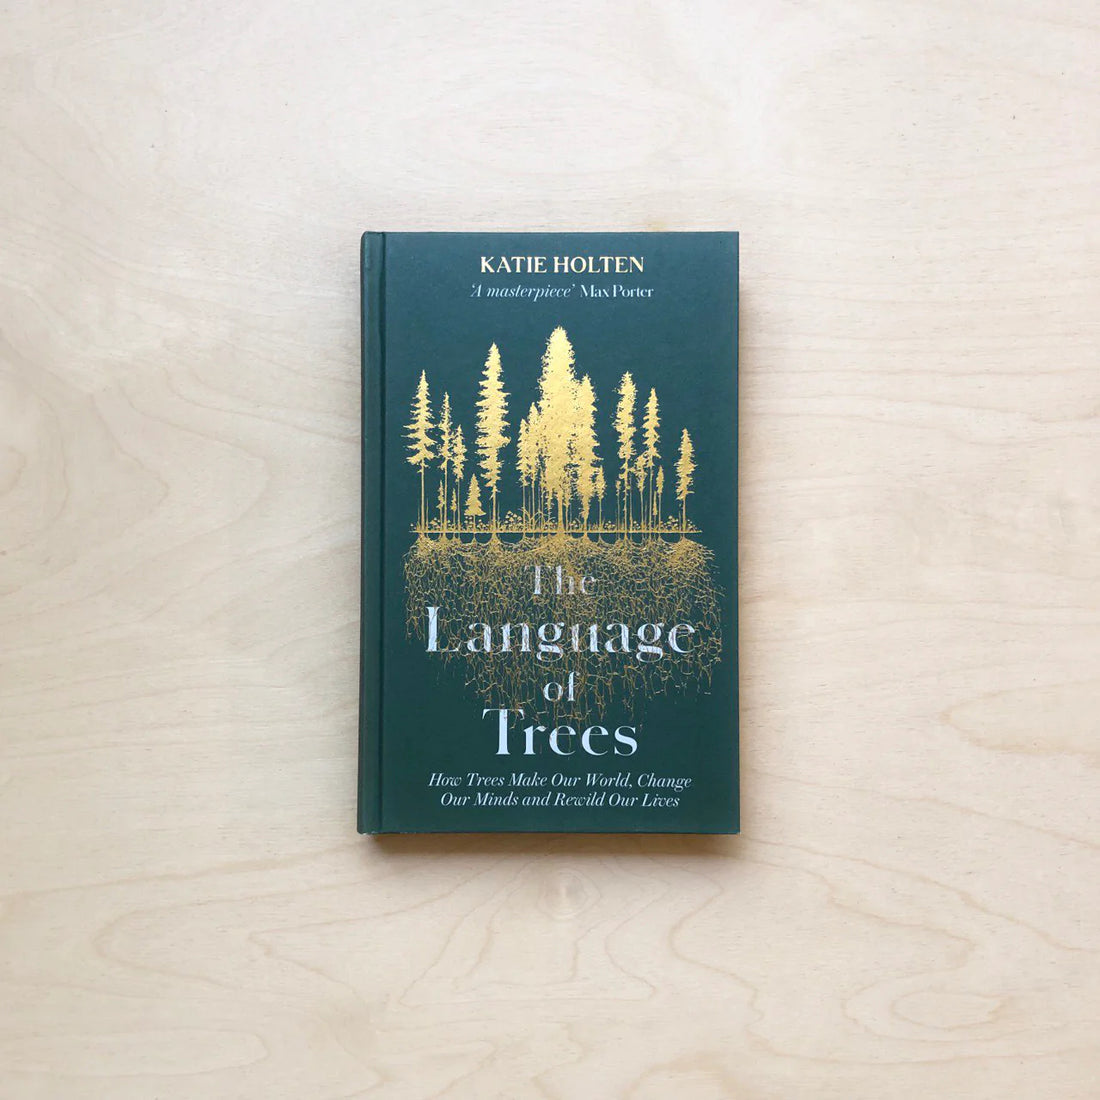 Book presentation: "The Language of Trees", with Katie Holten | 04 July - 7 pm CET